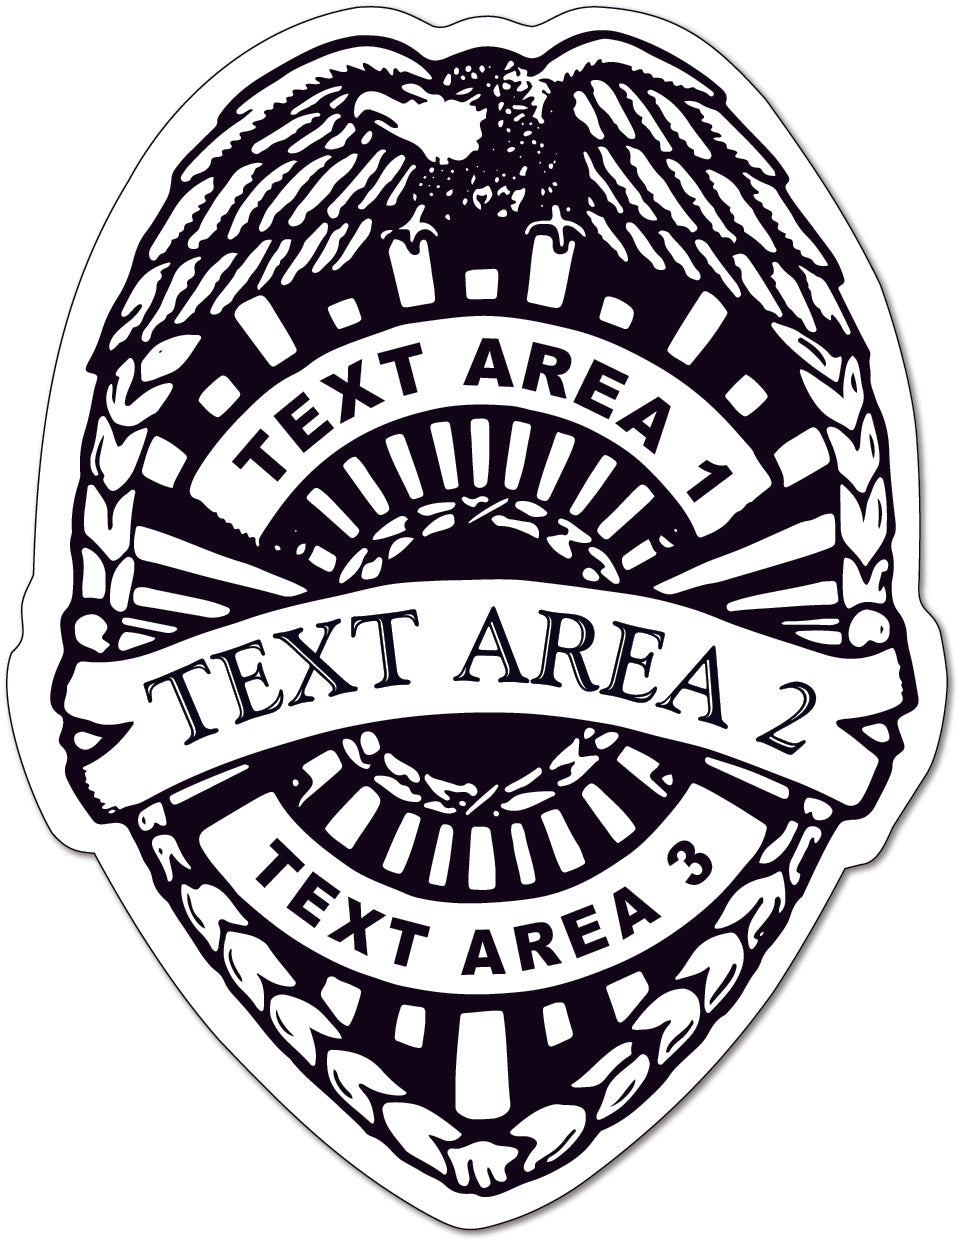 500+ Law Enforcement Stickers - Custom Police Badge Stickers - Emergency Service Decals - Free Proofs Before Printing | StickerShopLaw.com